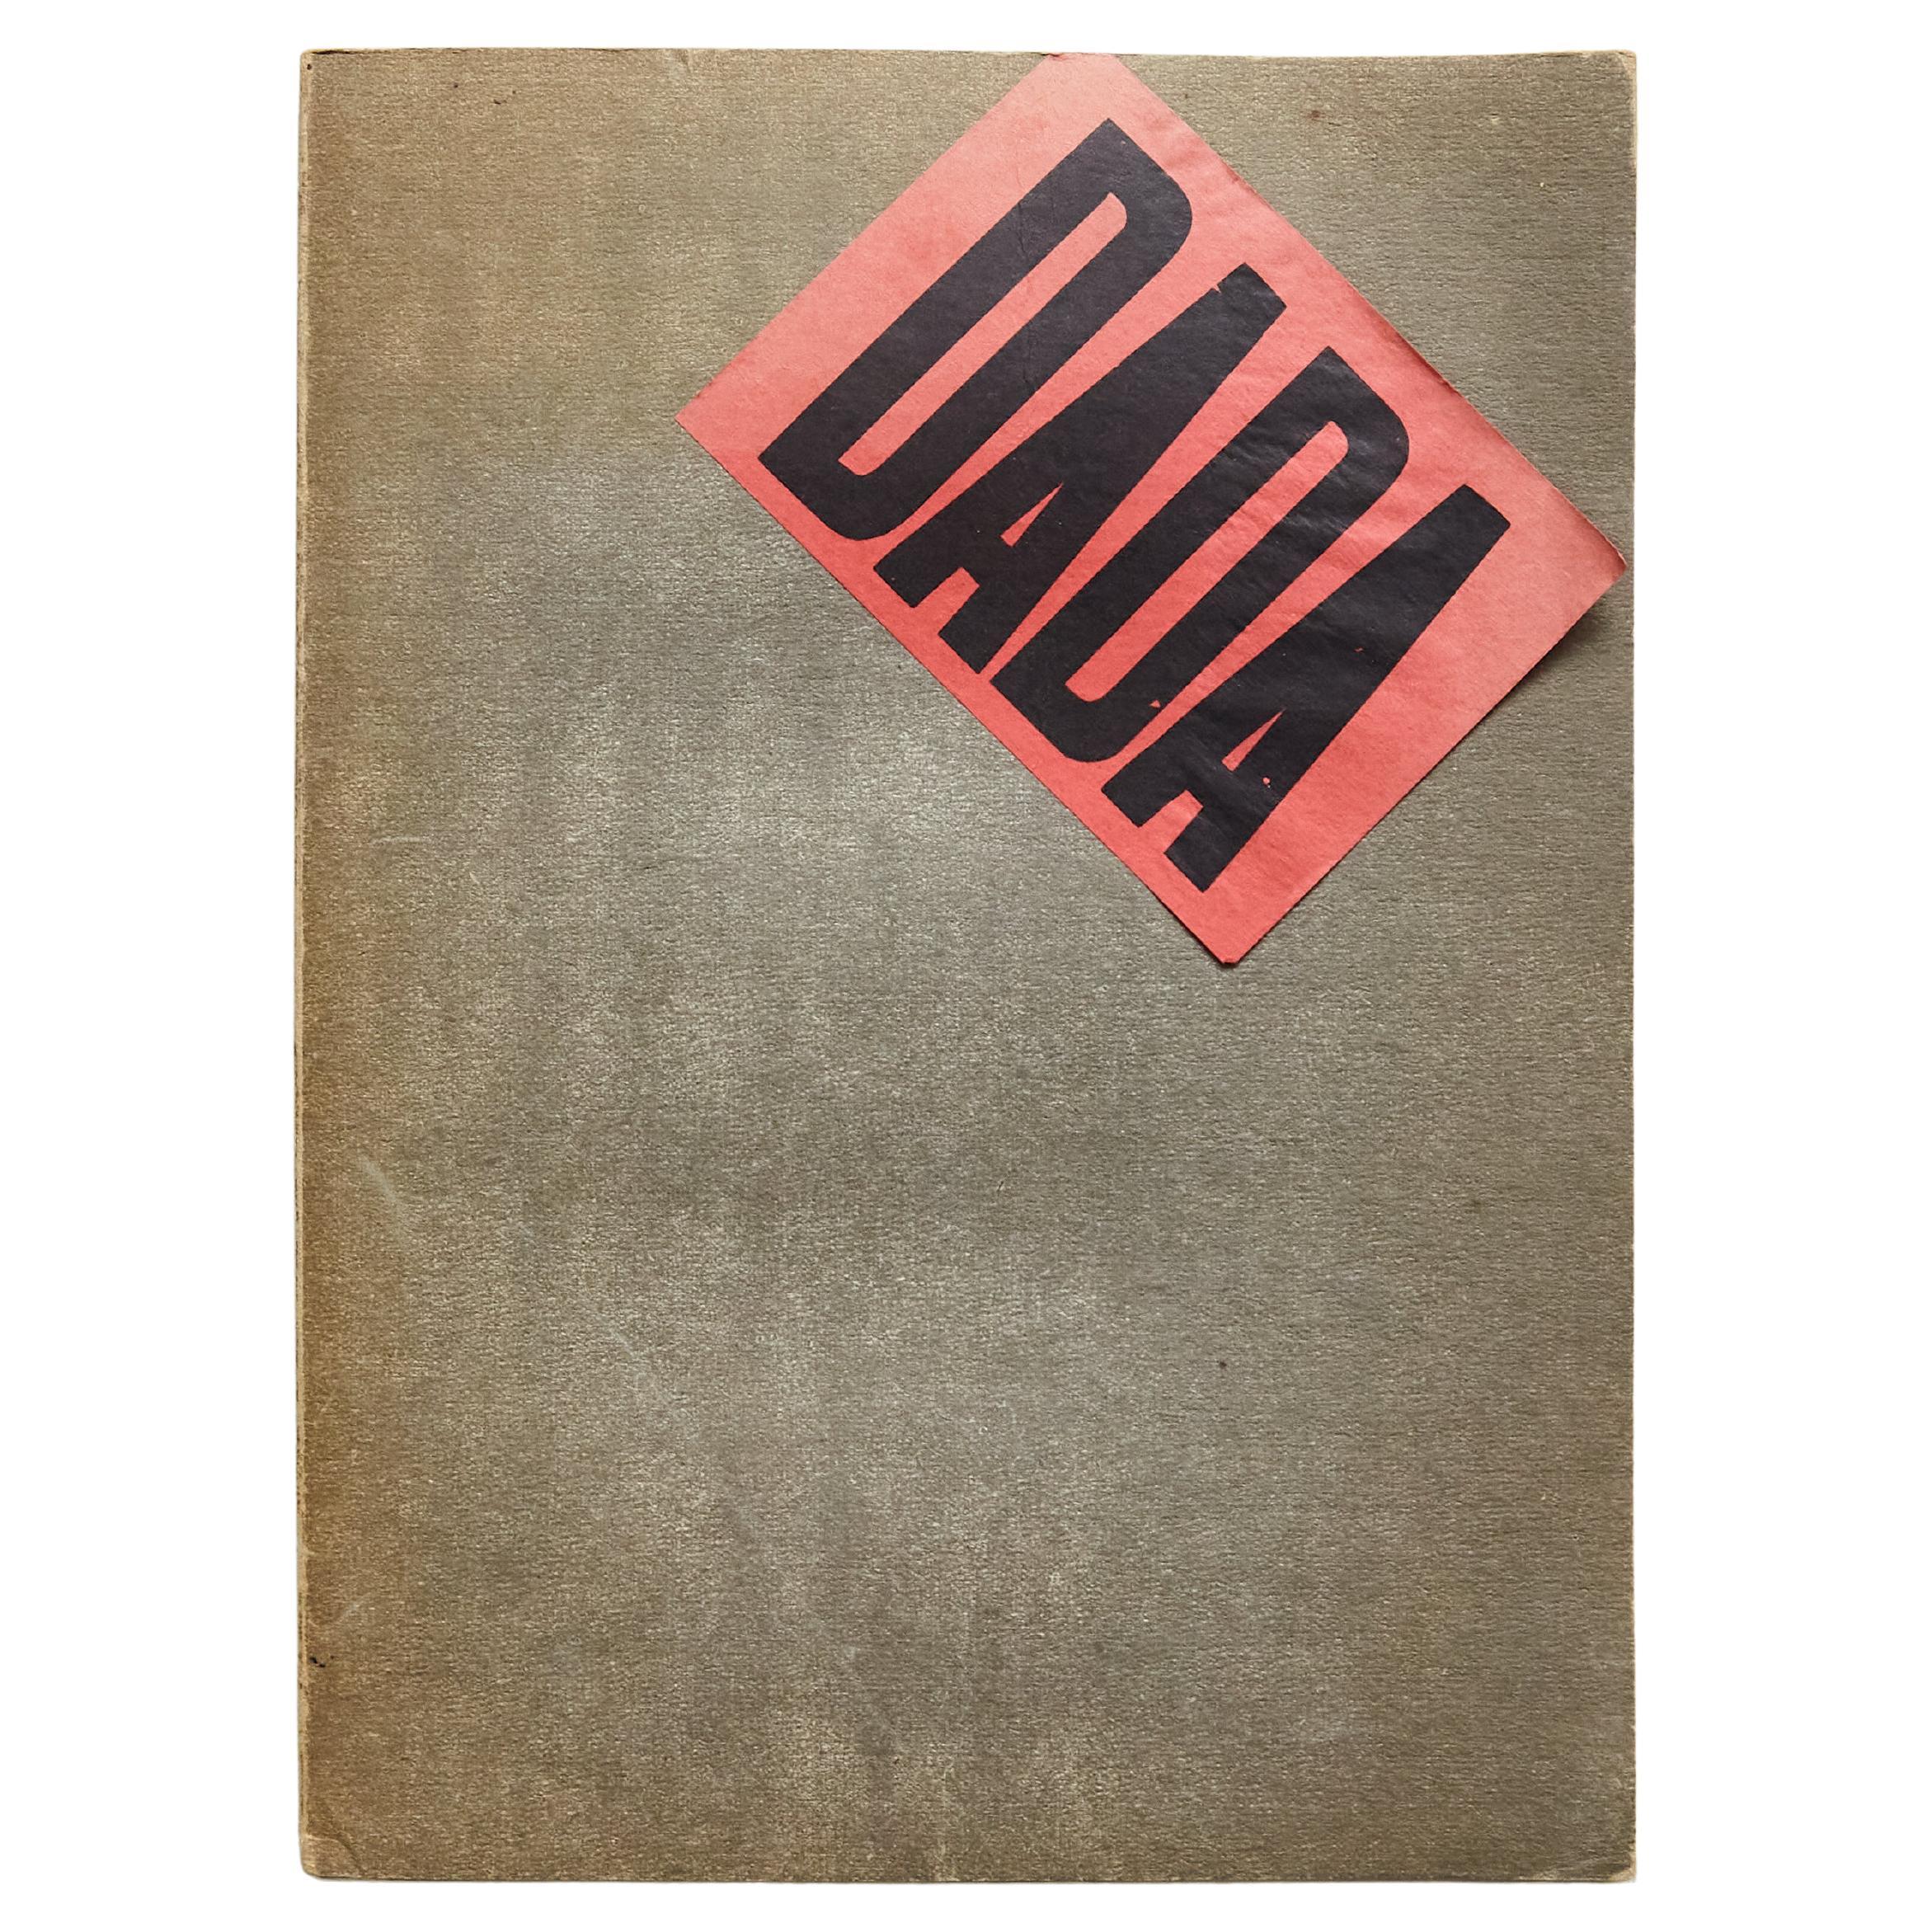 "DADA Documenting a Movement" 1958 Publication For Sale